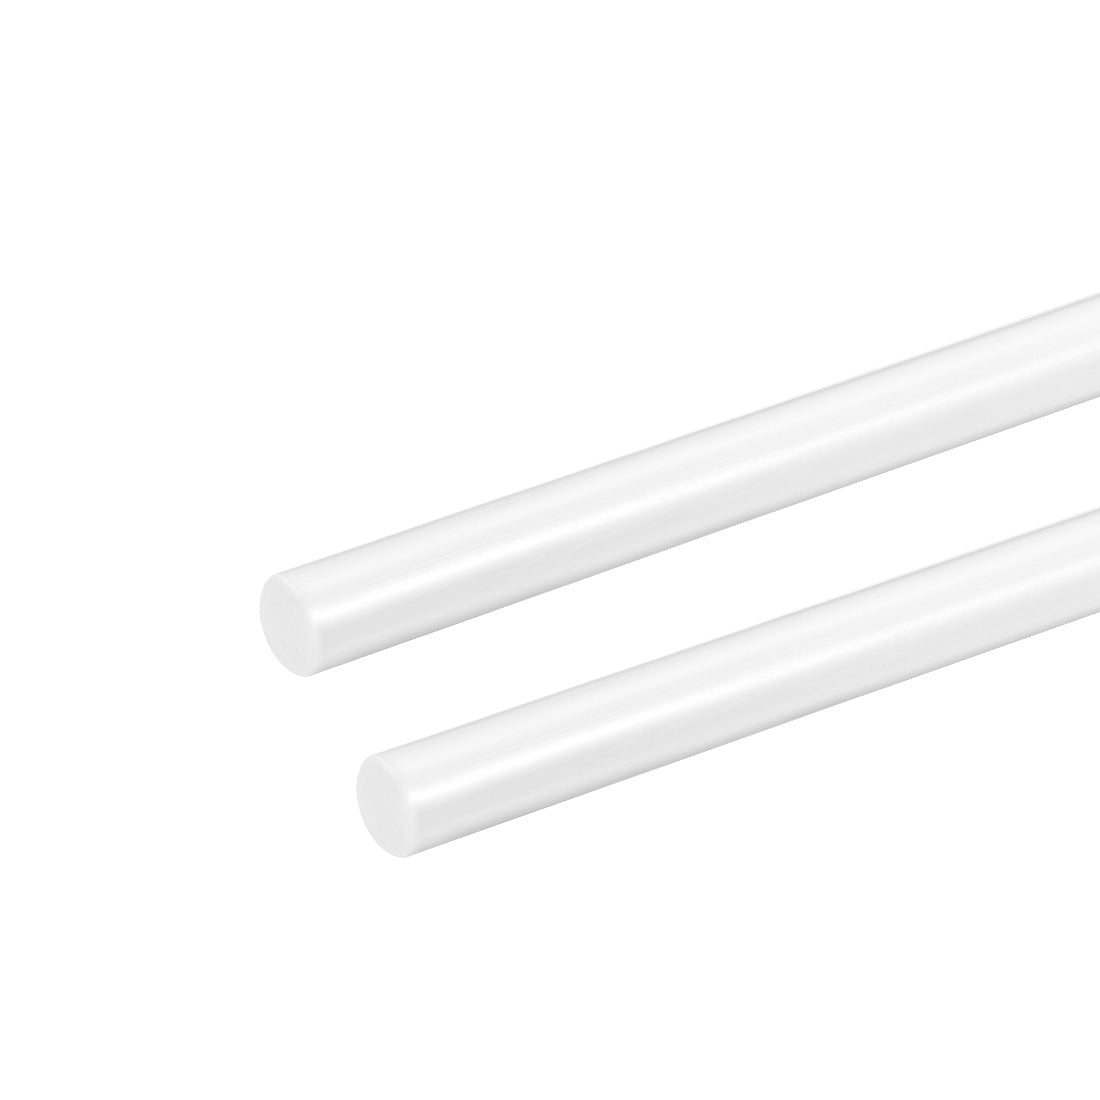 uxcell Uxcell 6mm × 20" ABS Plastic Round Bar Rod for Architectural Model Making DIY 2pcs